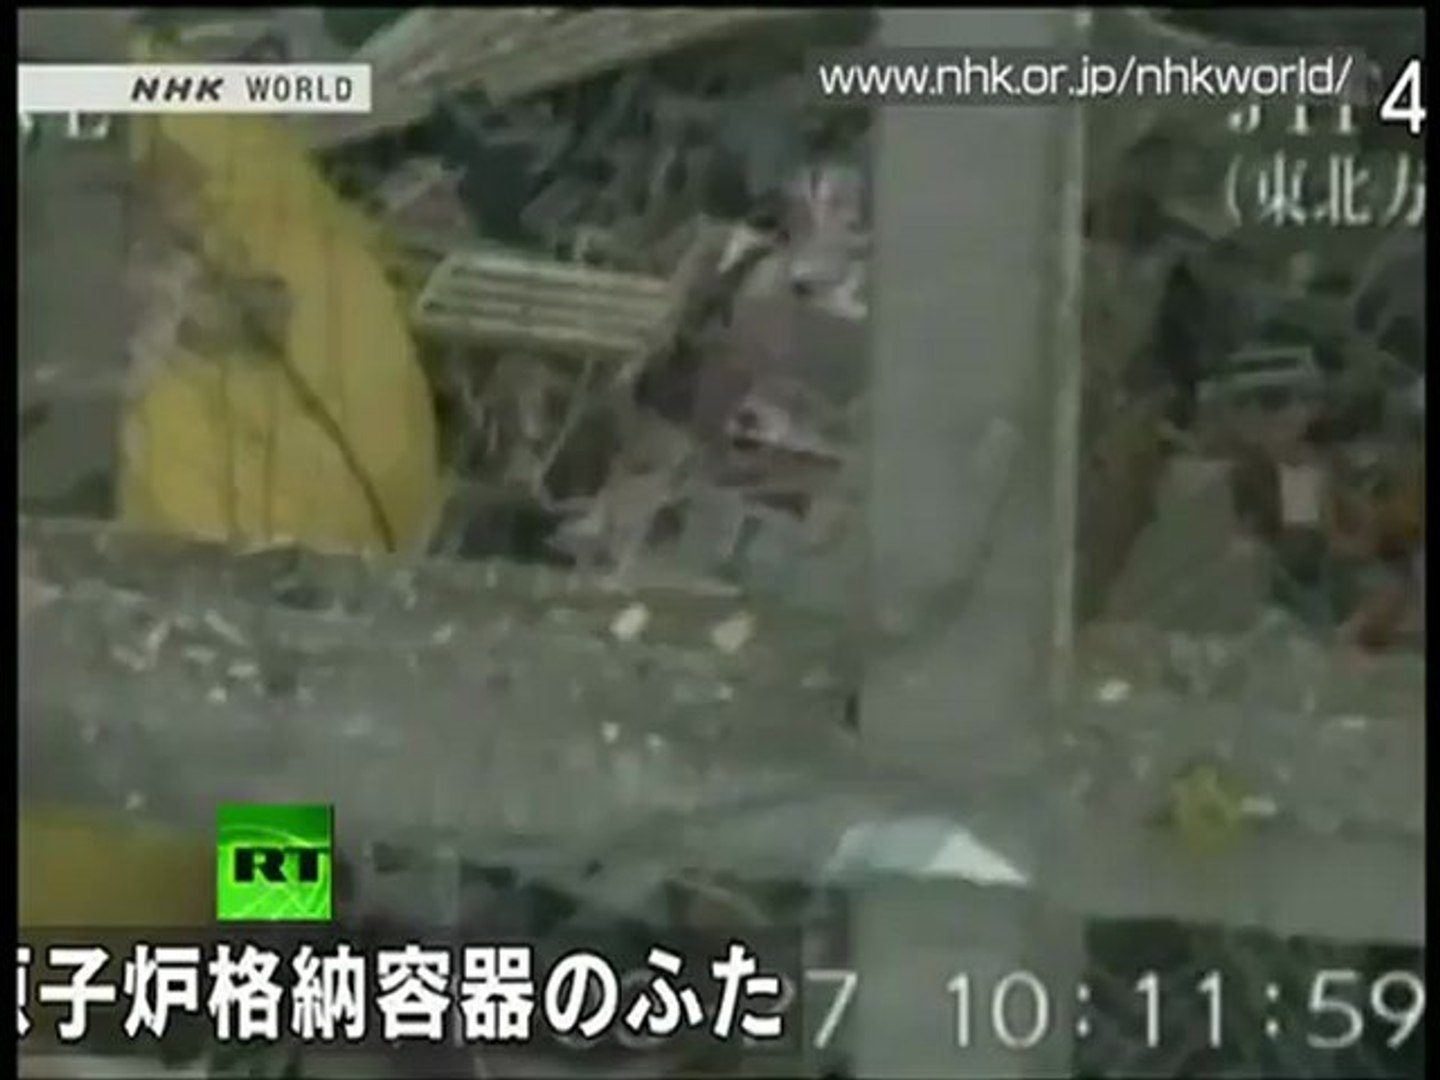 Latest helicopter footage of Fukushima, zoom-in on ruined reactors